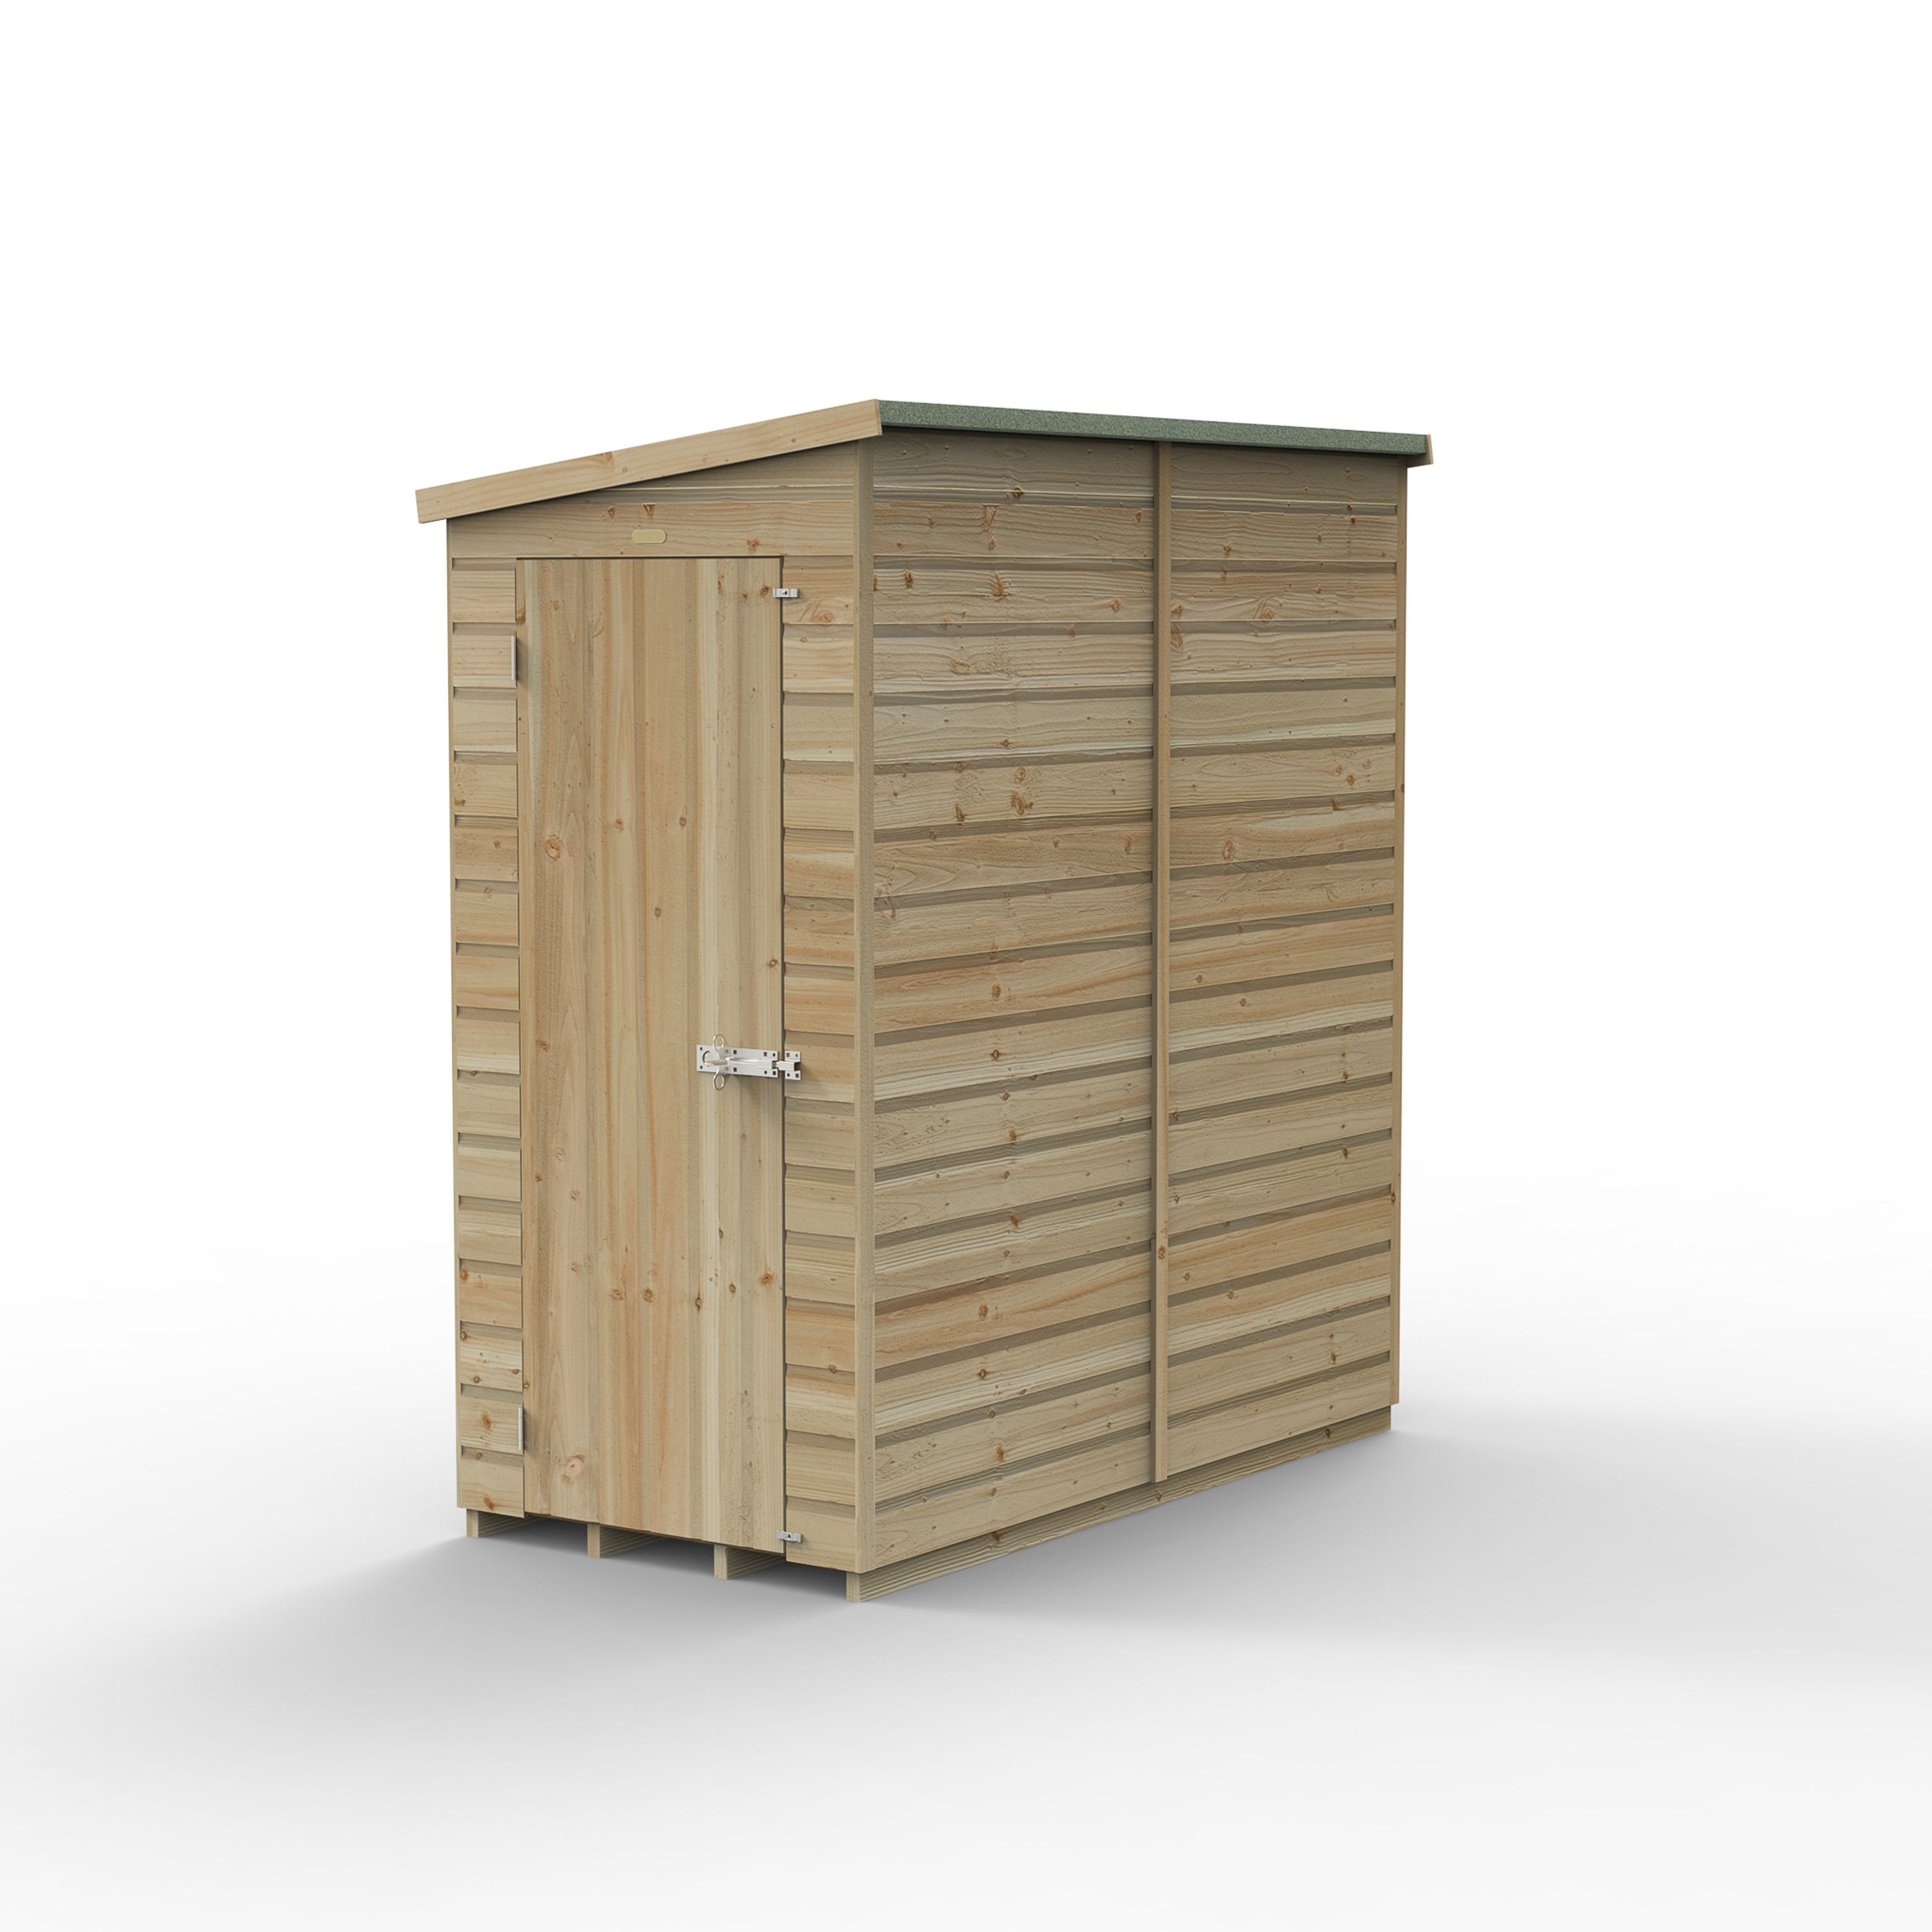 Forest Garden Beckwood 6x3 ft Pent Natural timber Wooden Shed with floor